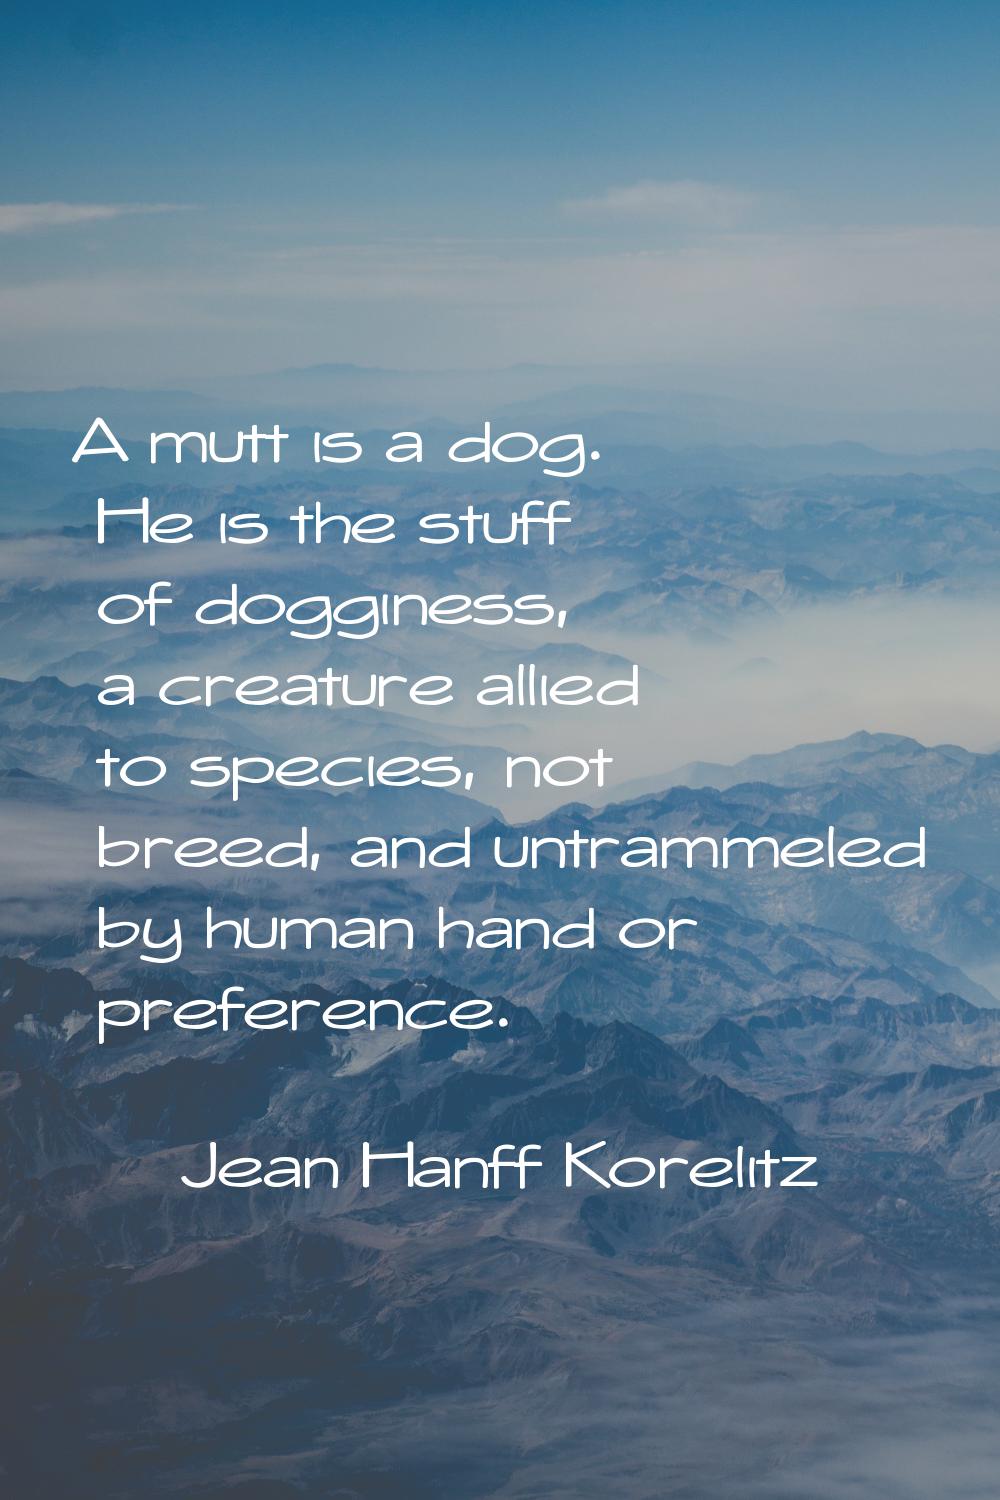 A mutt is a dog. He is the stuff of dogginess, a creature allied to species, not breed, and untramm